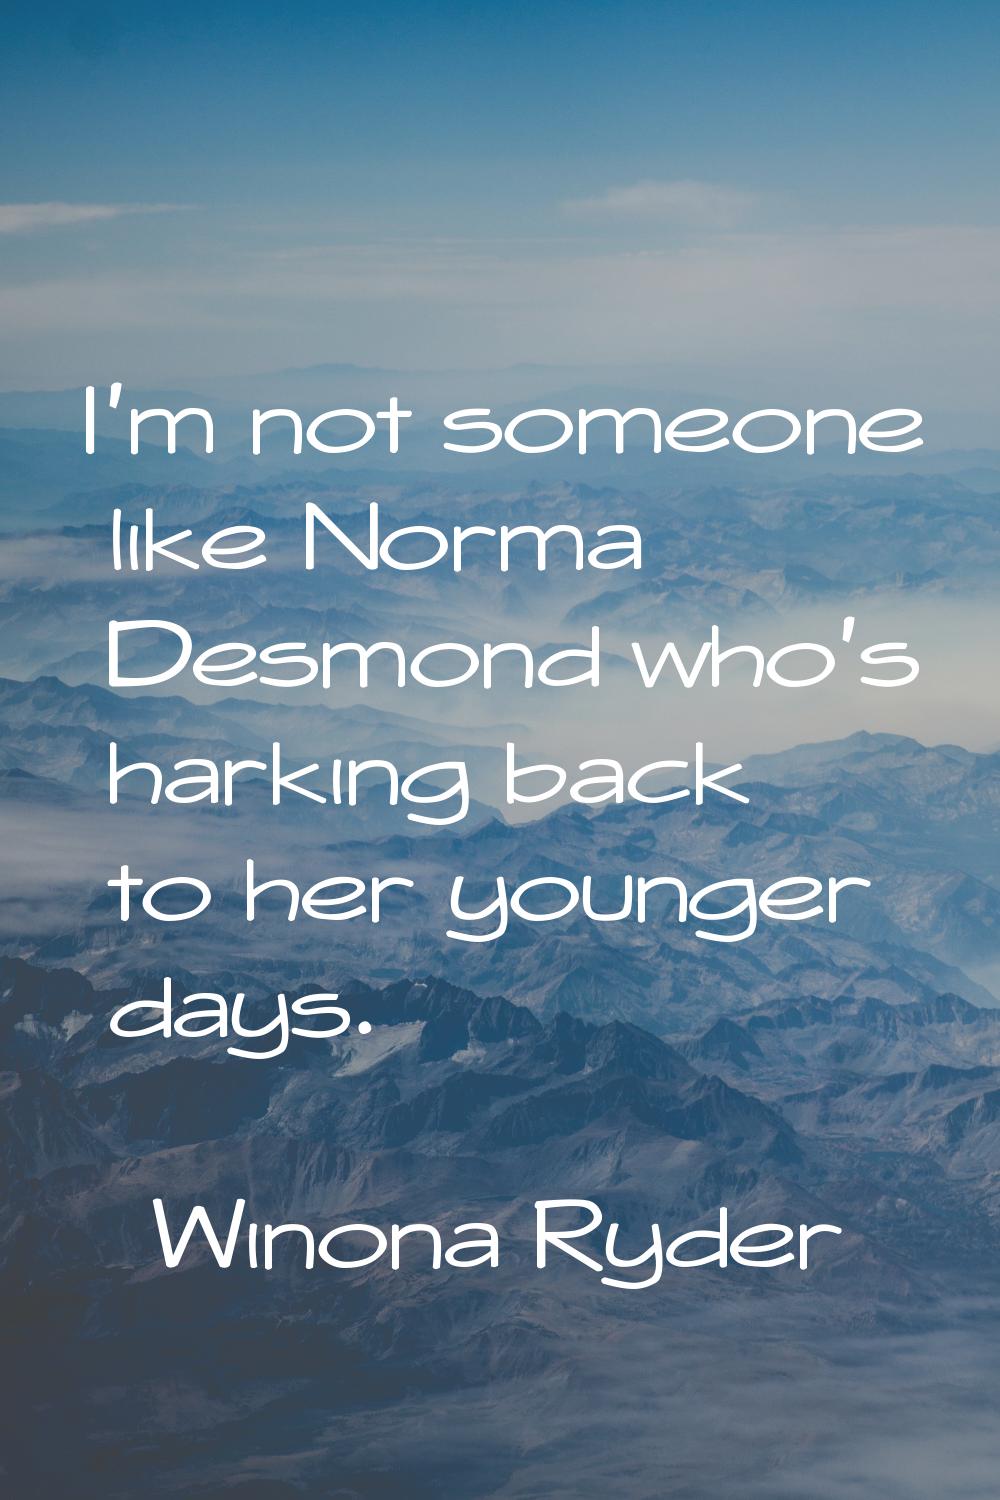 I'm not someone like Norma Desmond who's harking back to her younger days.